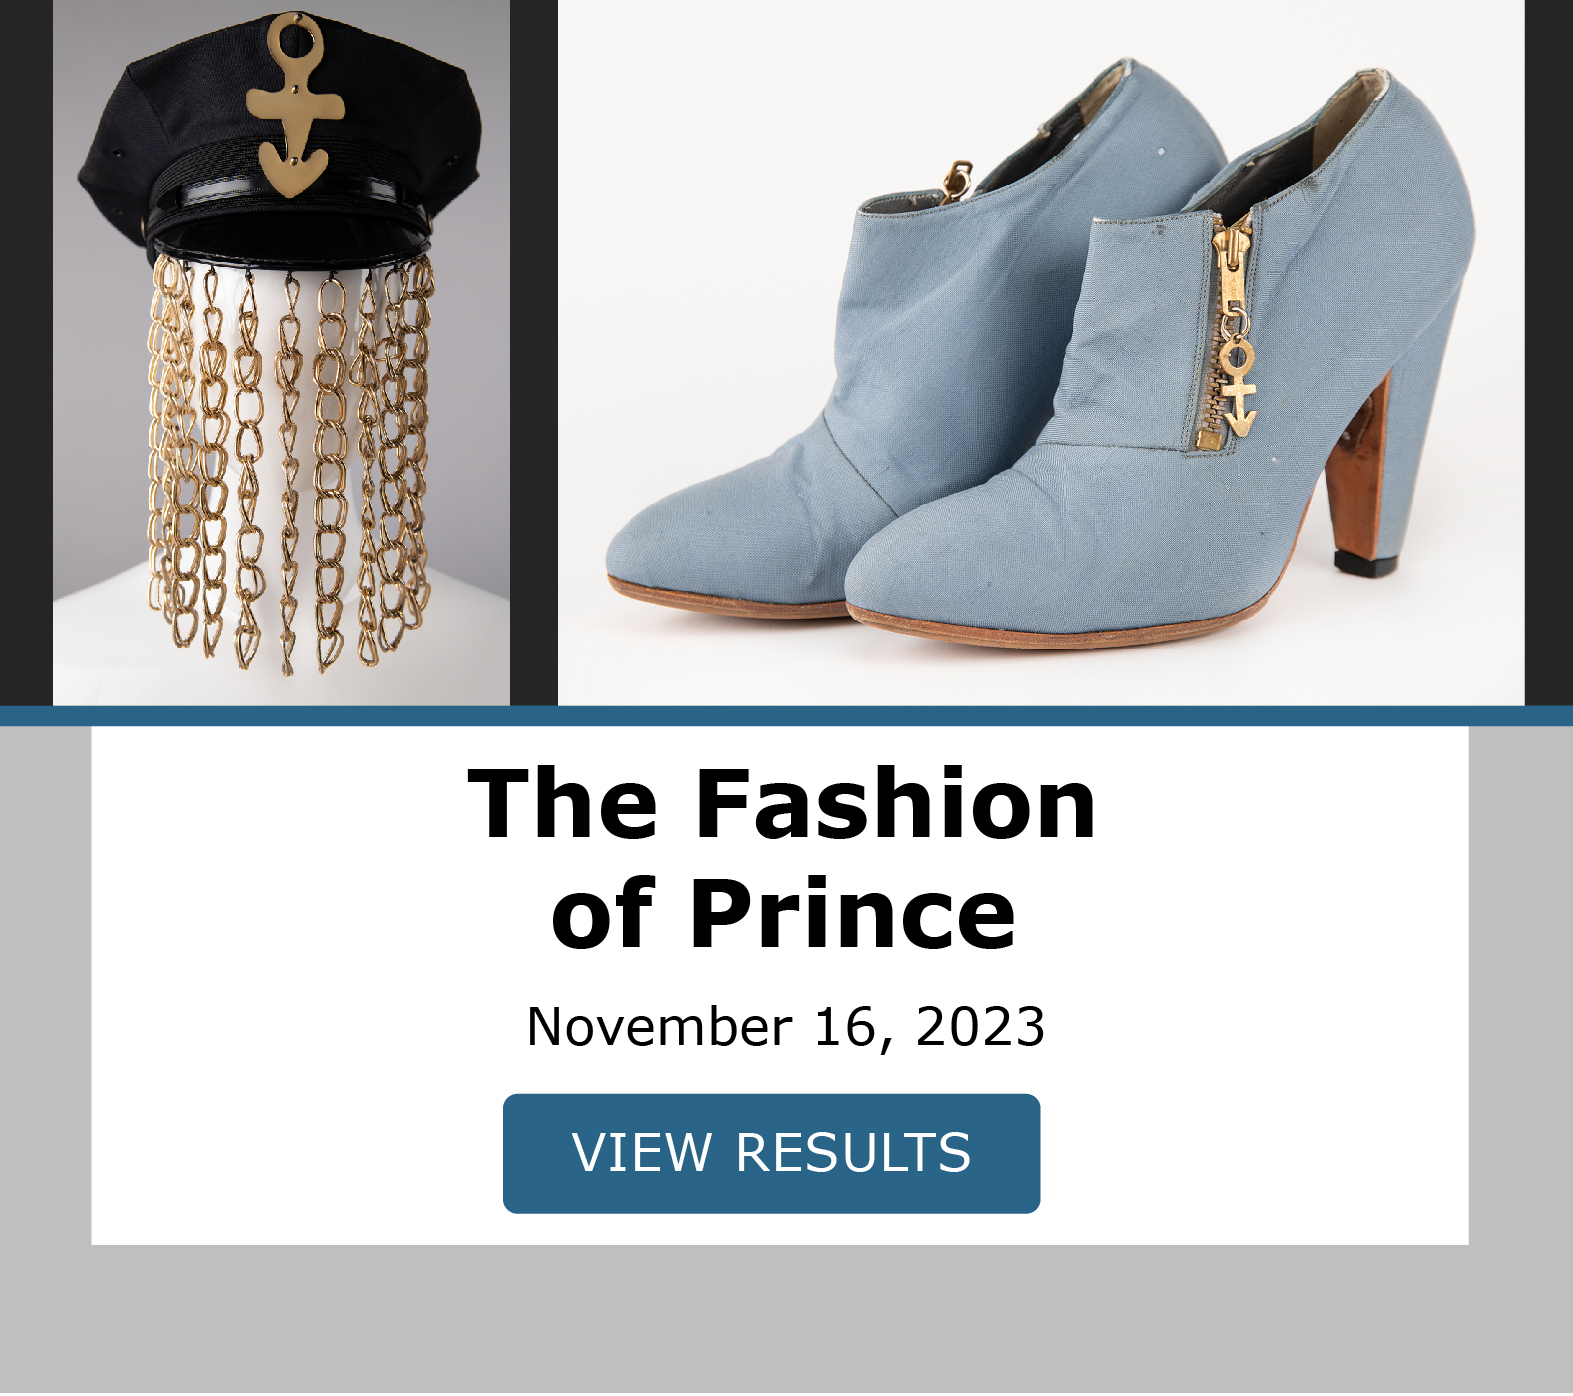 The Fashion of Prince. Bidding closed November 16. View lots now!